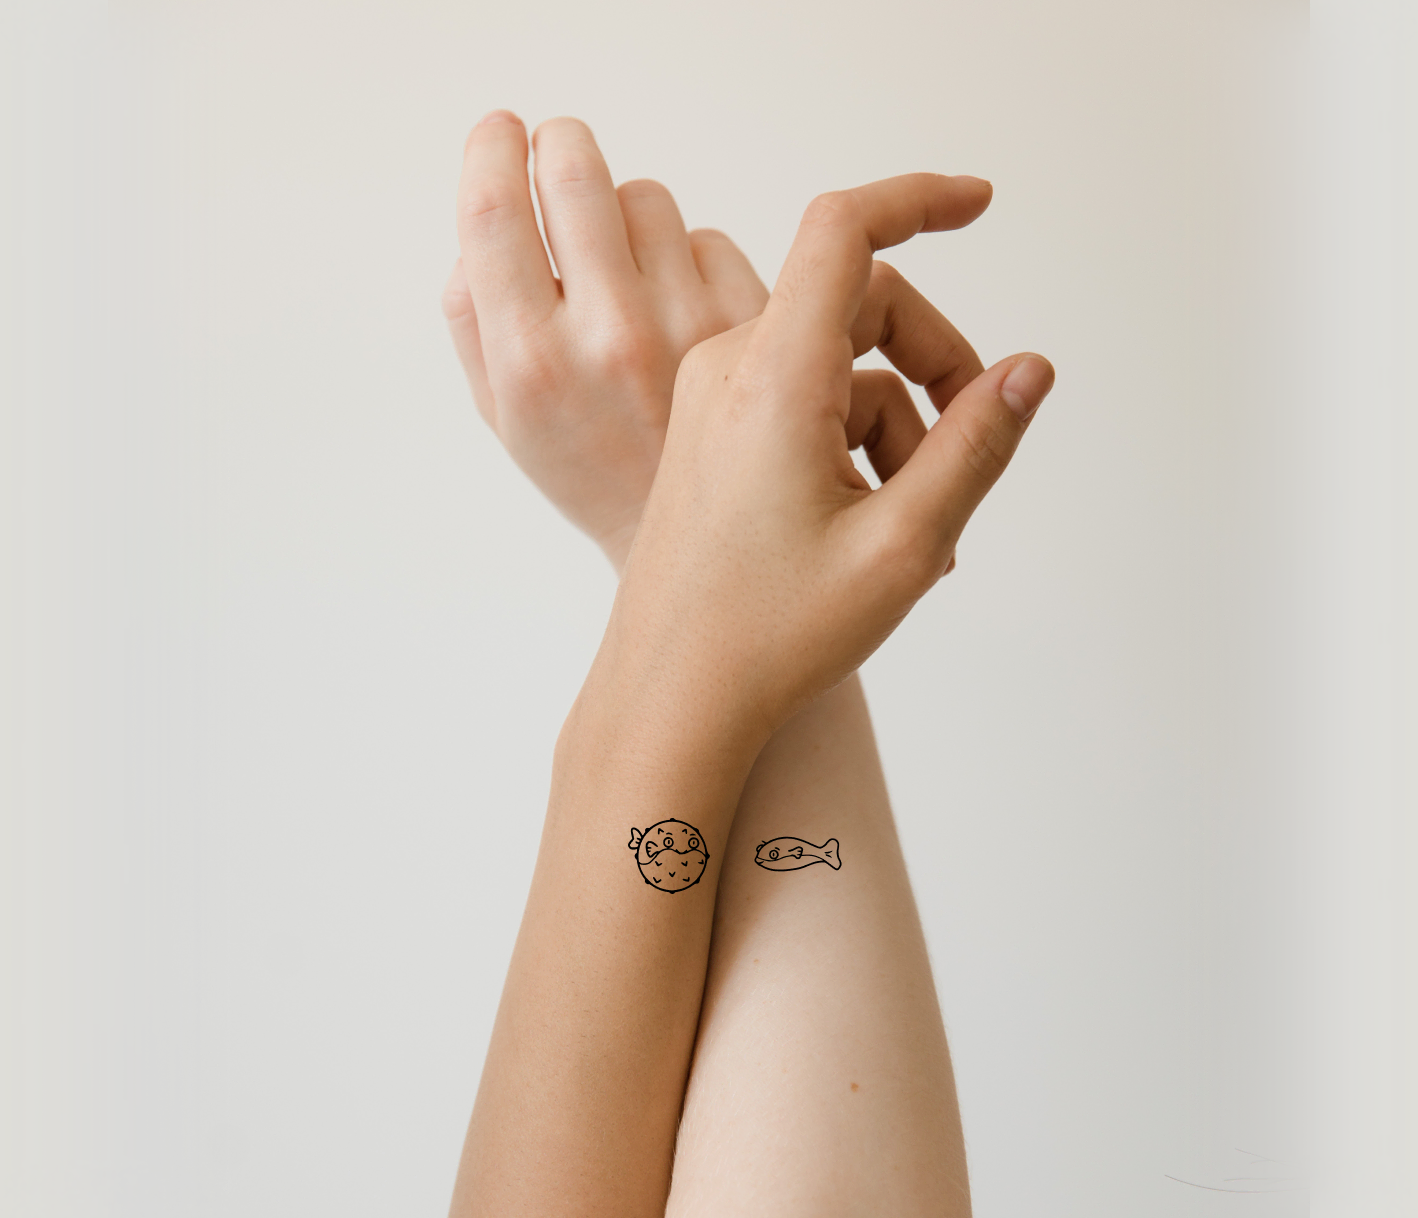 Company specializes in temporary tattoos